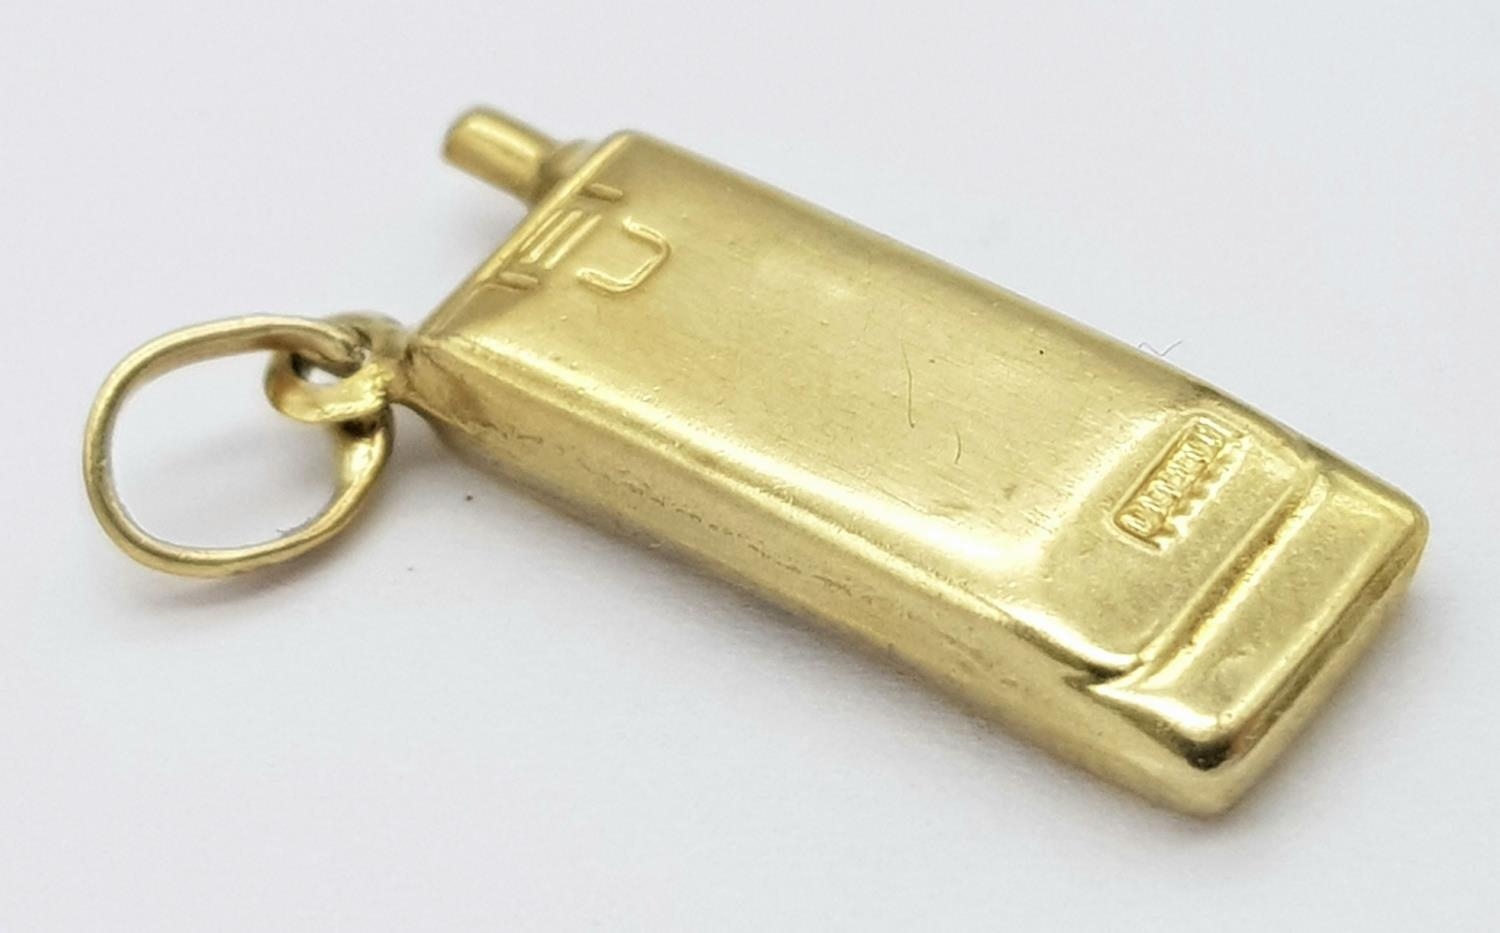 A 9K YELLOW GOLD MOBILE PHONE CHARM 0.8G , 20mm x 18mm. SC 9017 - Image 3 of 5